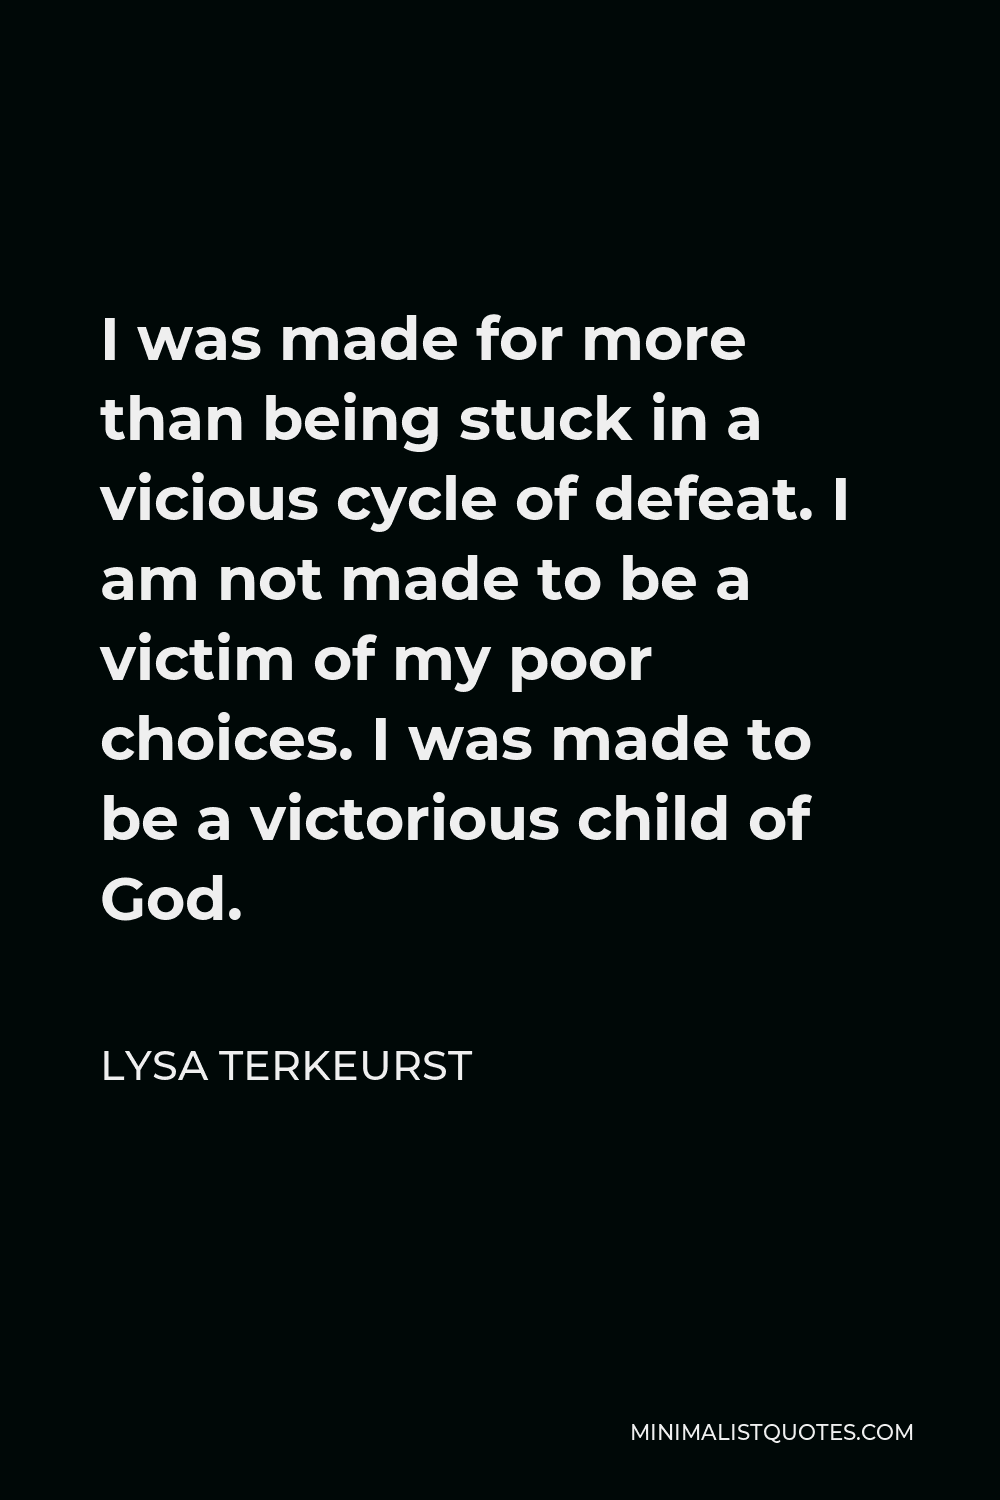 Lysa TerKeurst Quote - I was made for more than being stuck in a vicious cycle of defeat. I am not made to be a victim of my poor choices. I was made to be a victorious child of God.